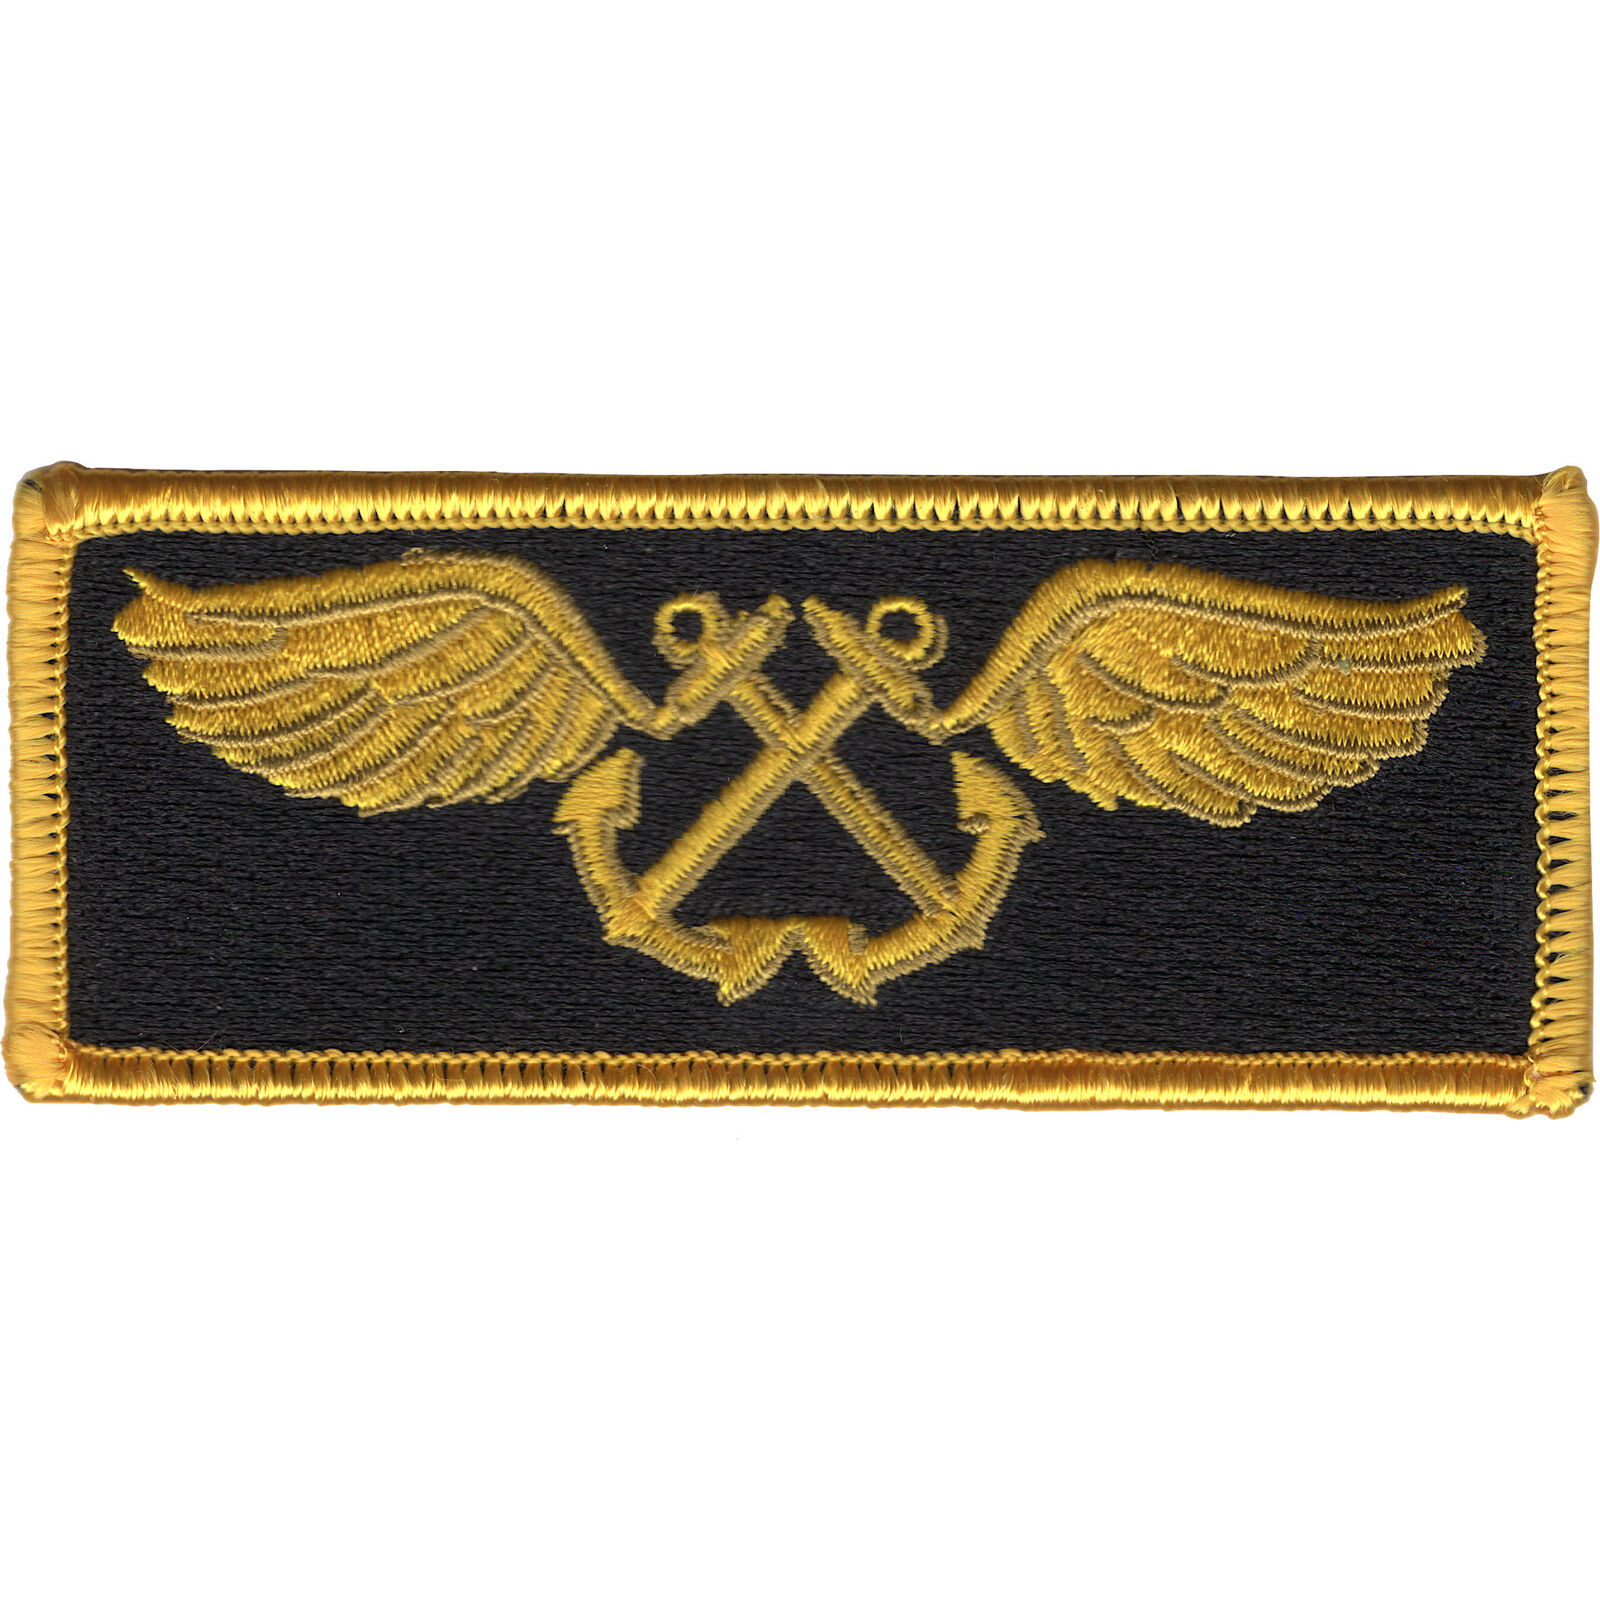 Aviation Boatswain's Mate AB Patch